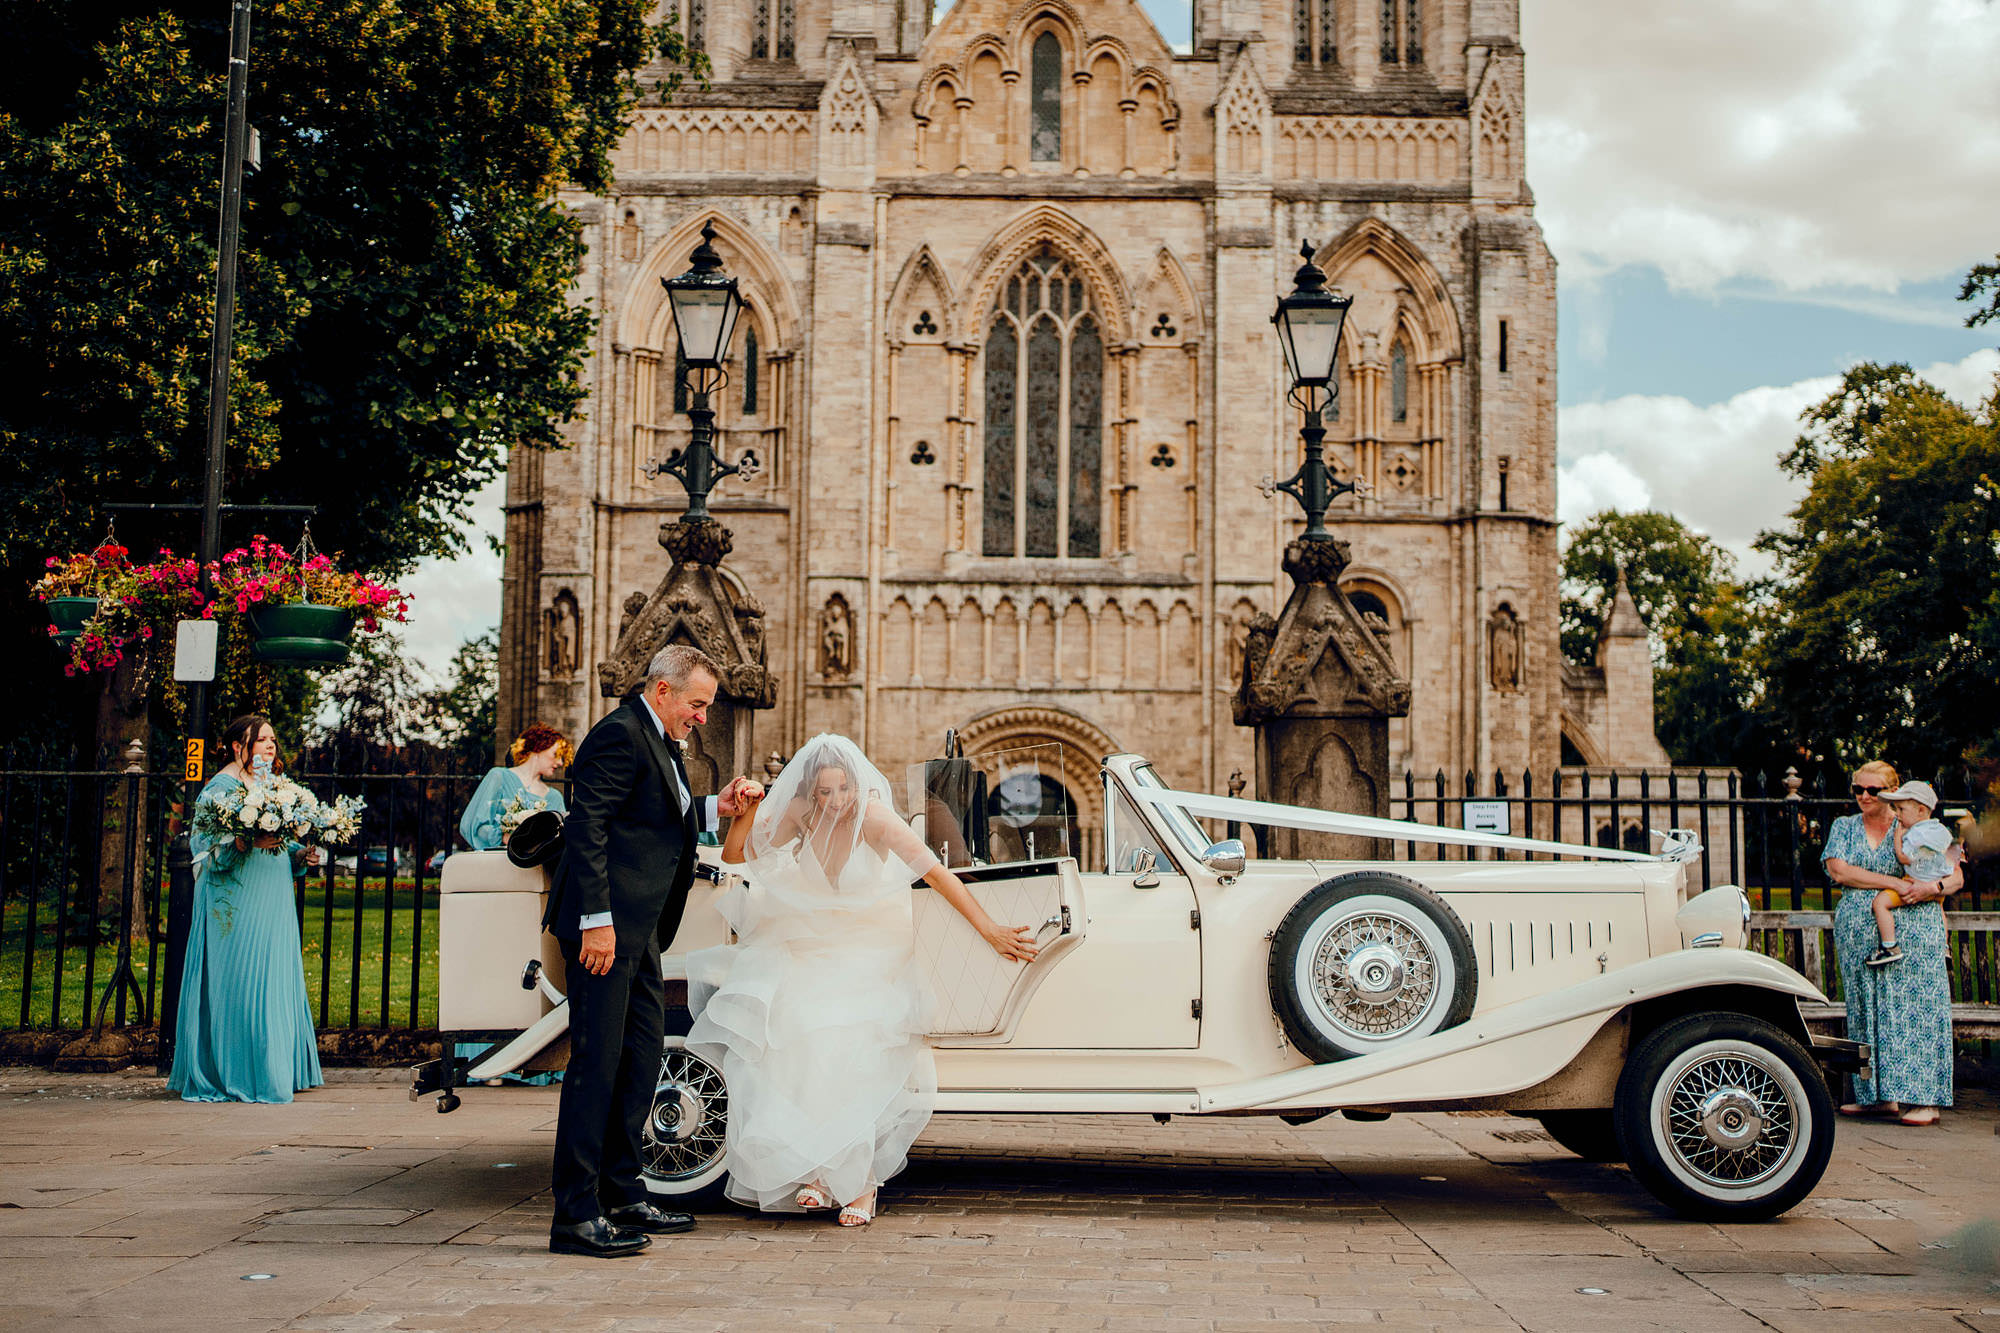 Selby Abbey wedding photography